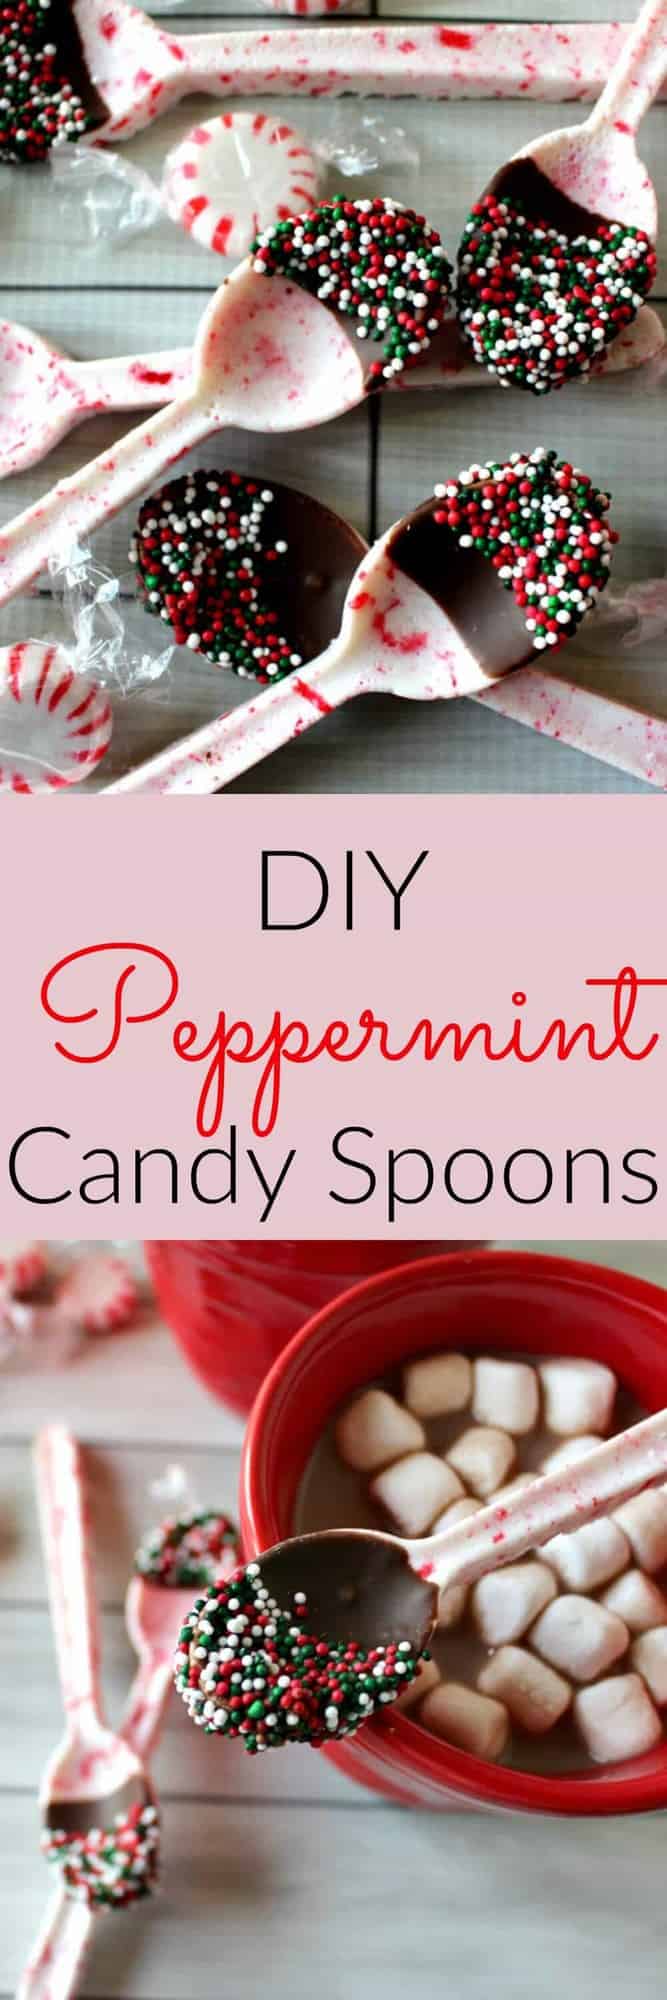 Peppermint Candy Spoons - a cute and easy DIY holiday gift